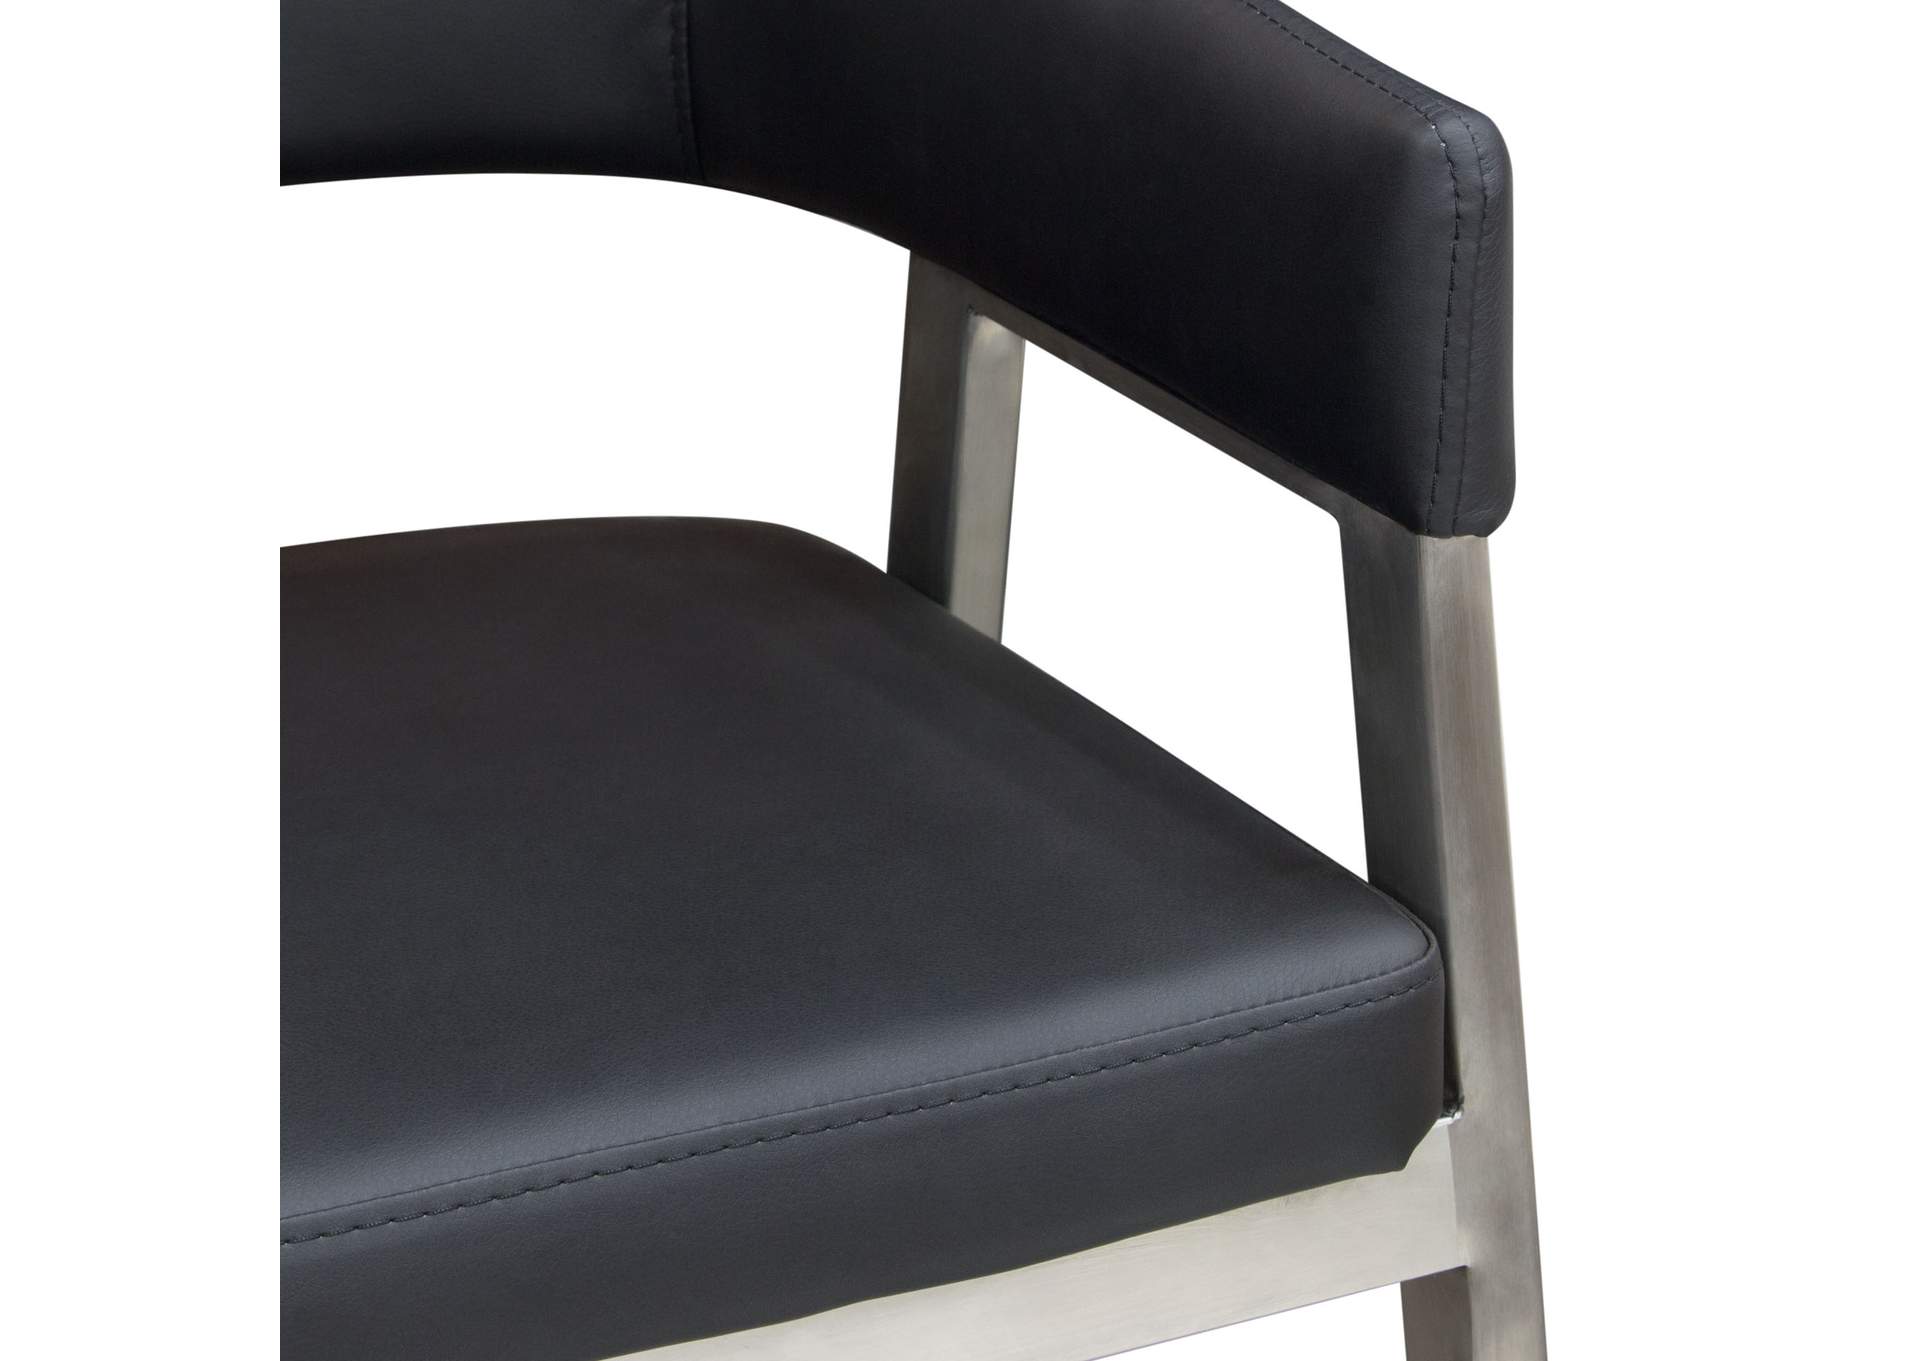 Adele Set of Two Counter Height Chairs in Black Leatherette w/ Brushed Stainless Steel Leg by Diamond Sofa,Diamond Sofa